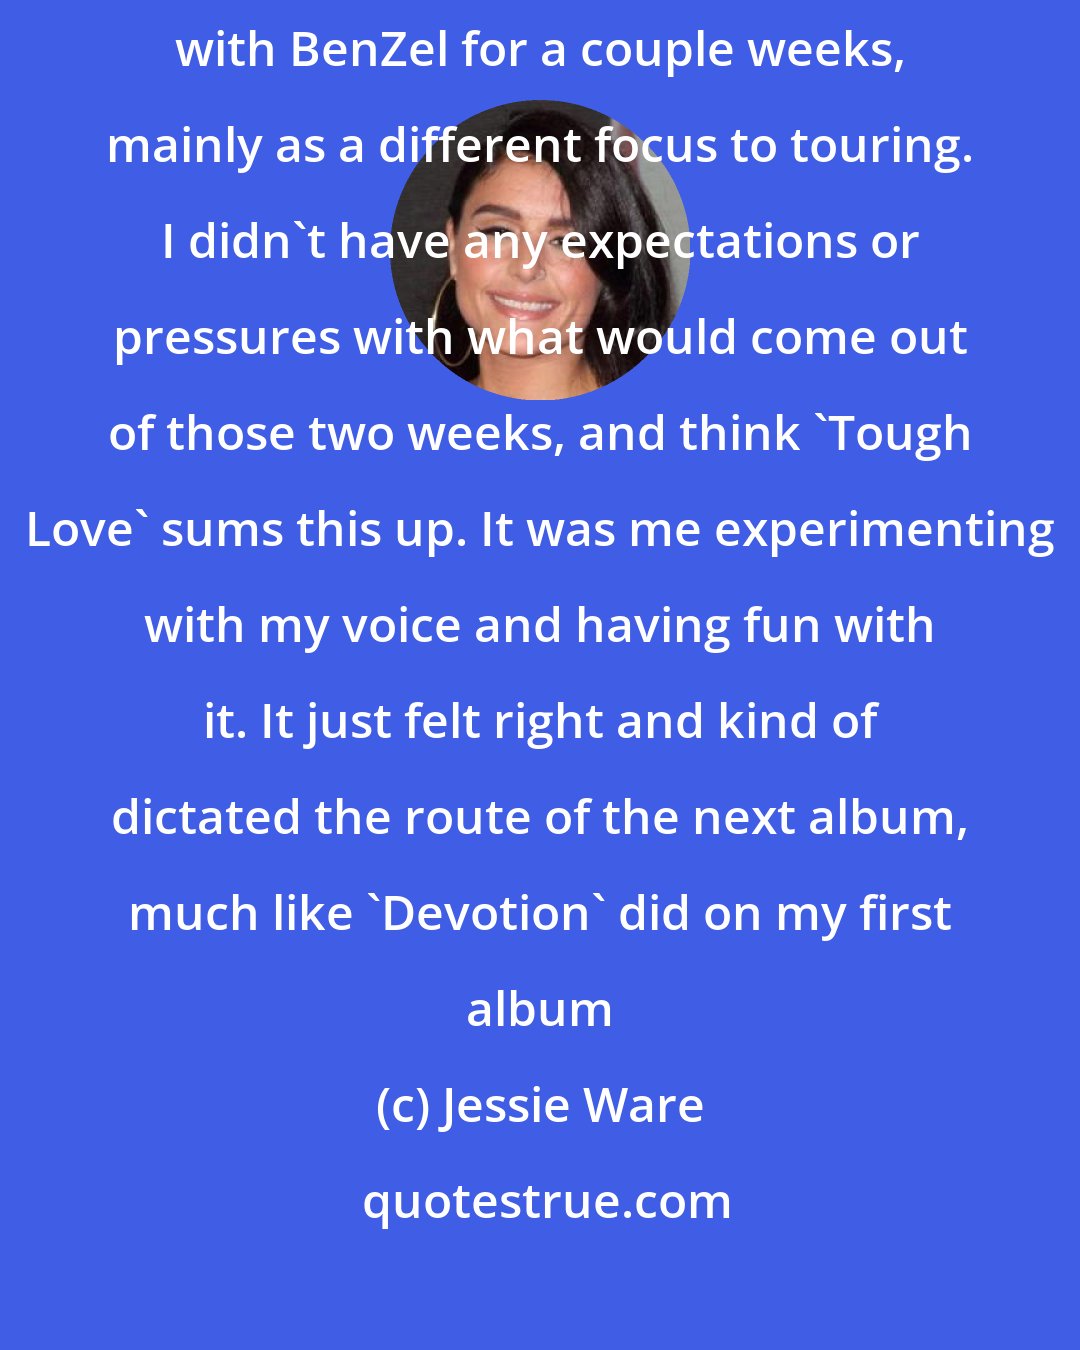 Jessie Ware: I had just finished a run of shows in the States and went to NY to work with BenZel for a couple weeks, mainly as a different focus to touring. I didn't have any expectations or pressures with what would come out of those two weeks, and think 'Tough Love' sums this up. It was me experimenting with my voice and having fun with it. It just felt right and kind of dictated the route of the next album, much like 'Devotion' did on my first album